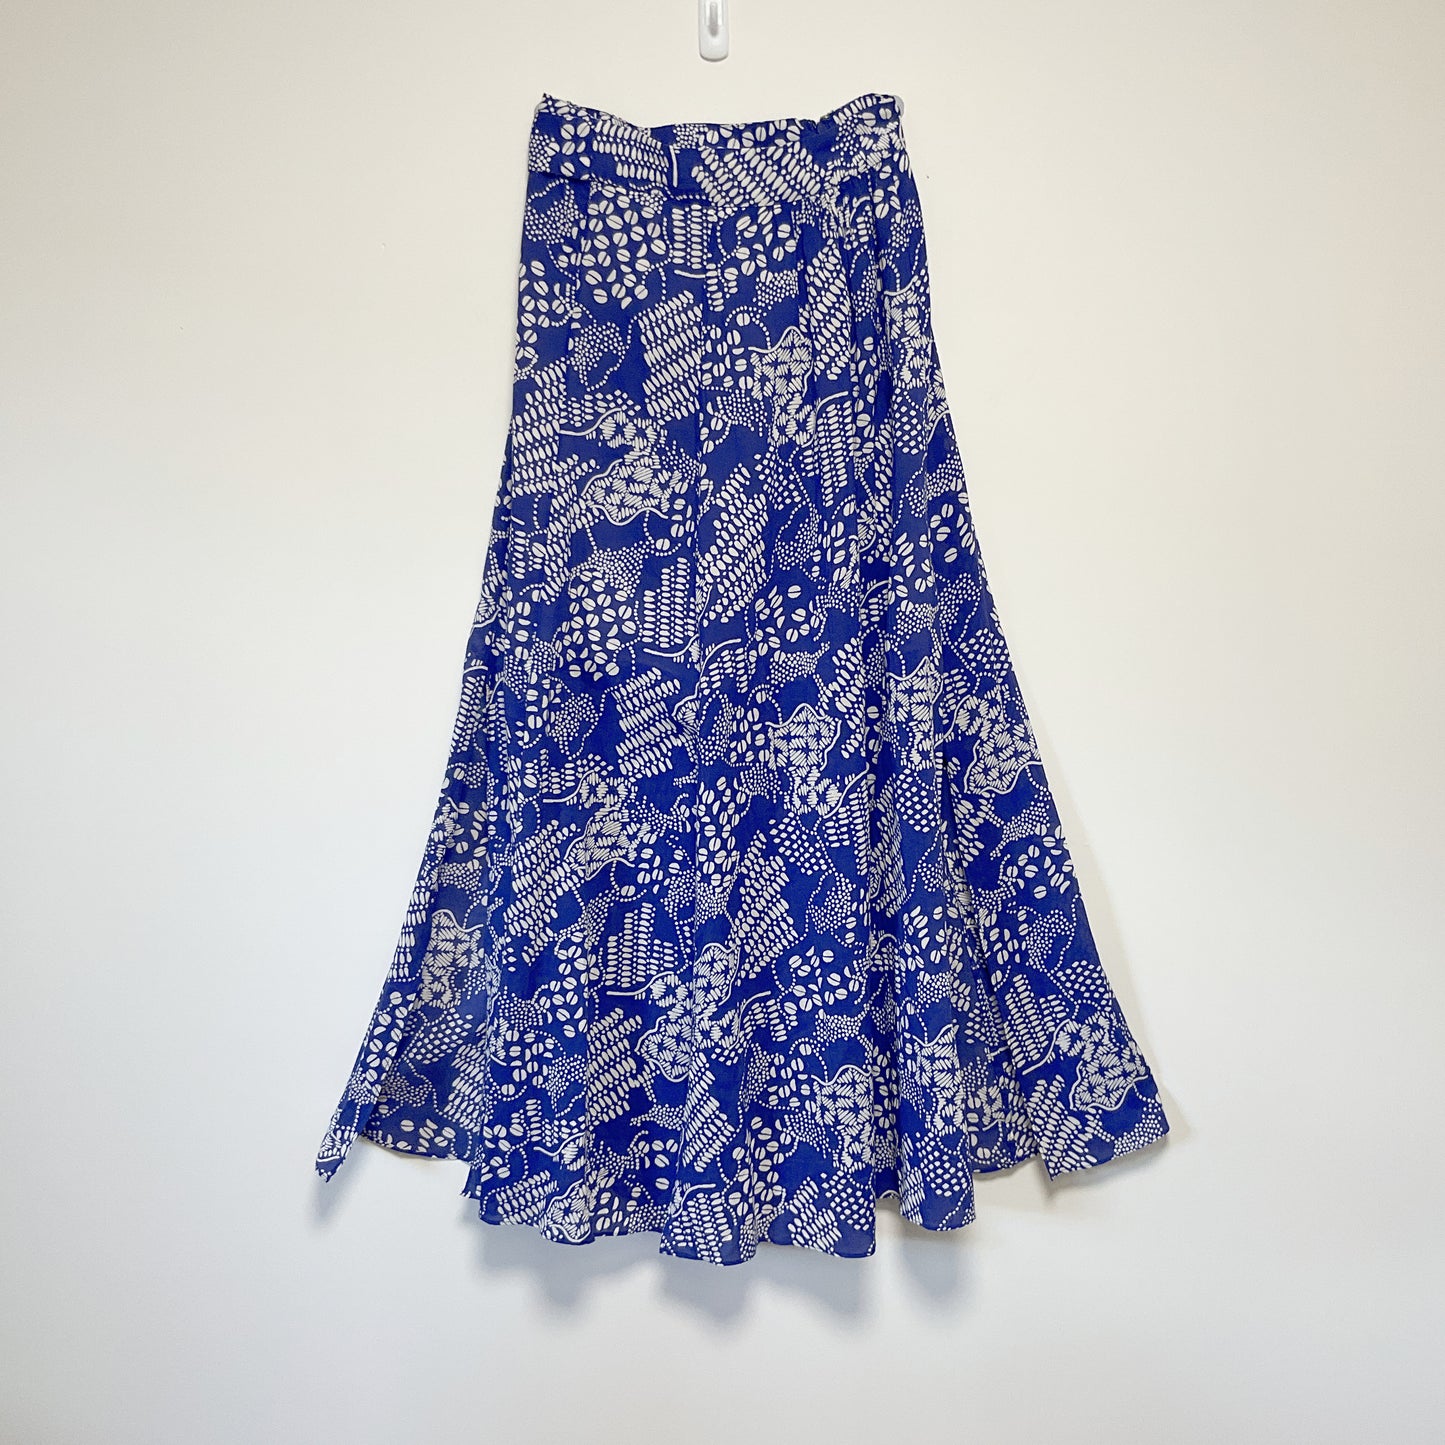 Other Stories - Maxi Skirt